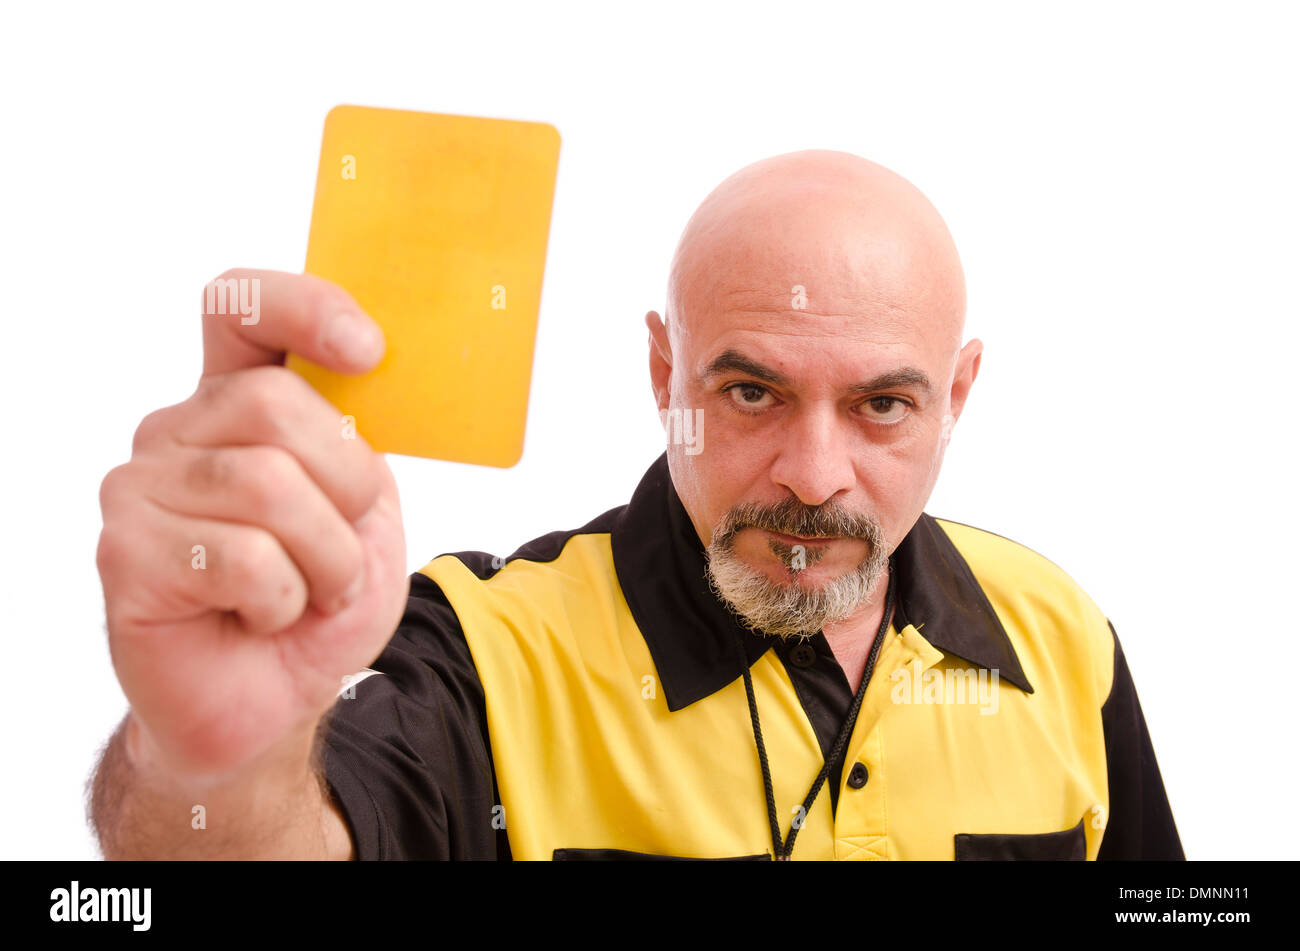 Referee show yellow card to the view Stock Photo